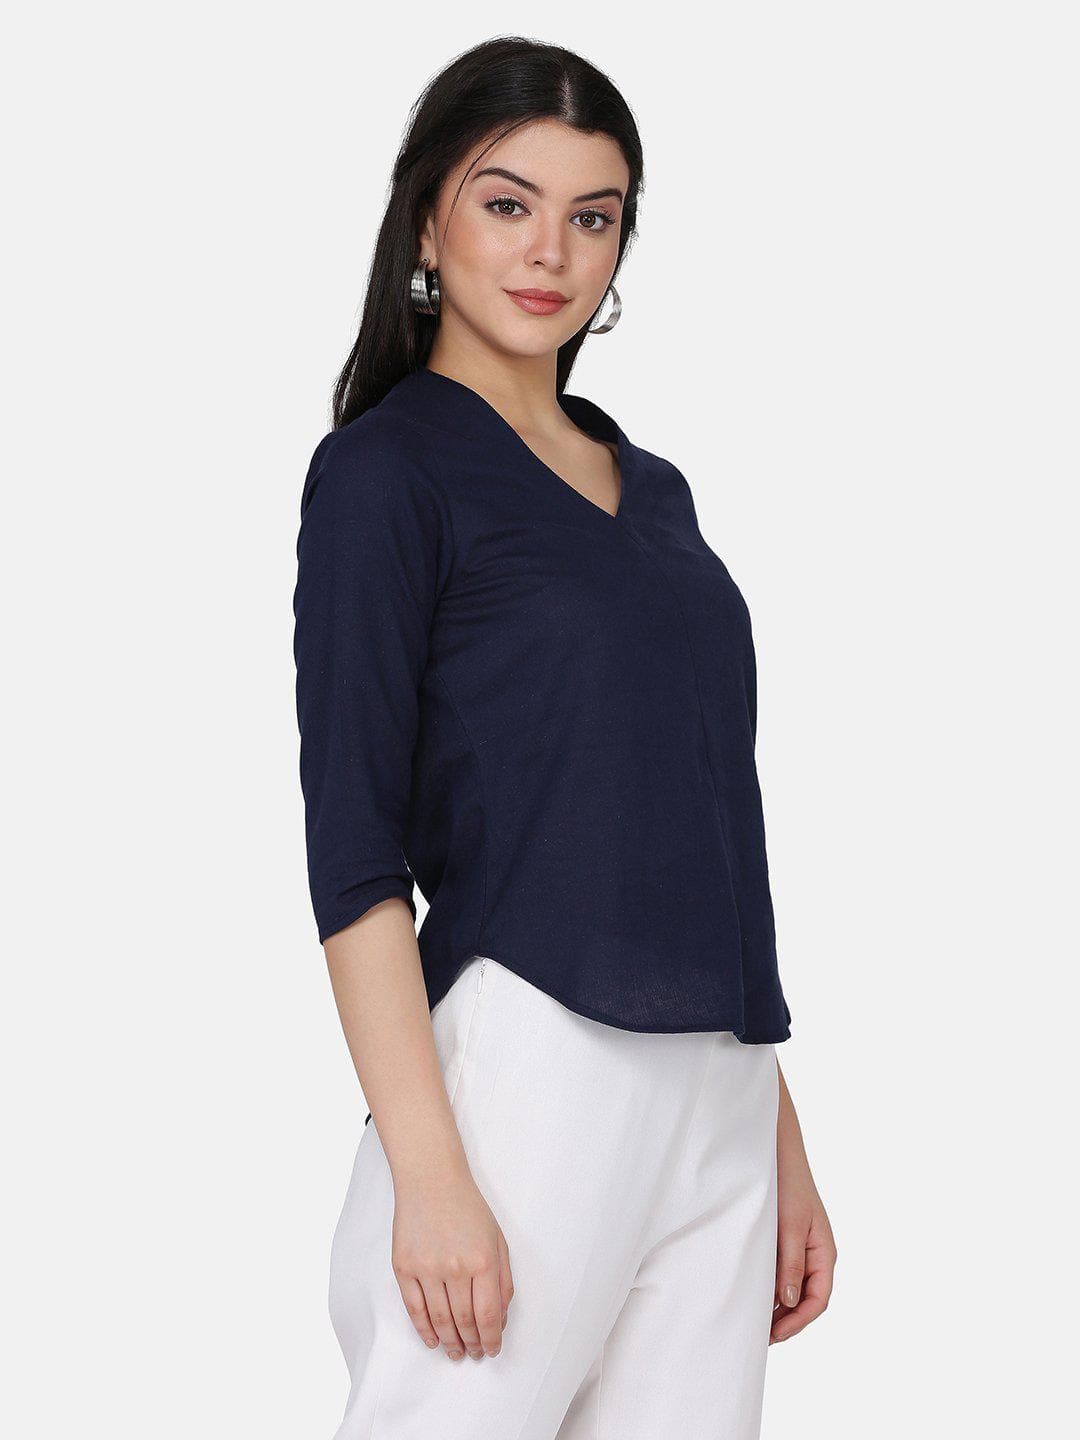 Cotton Top For Women - Navy Blue